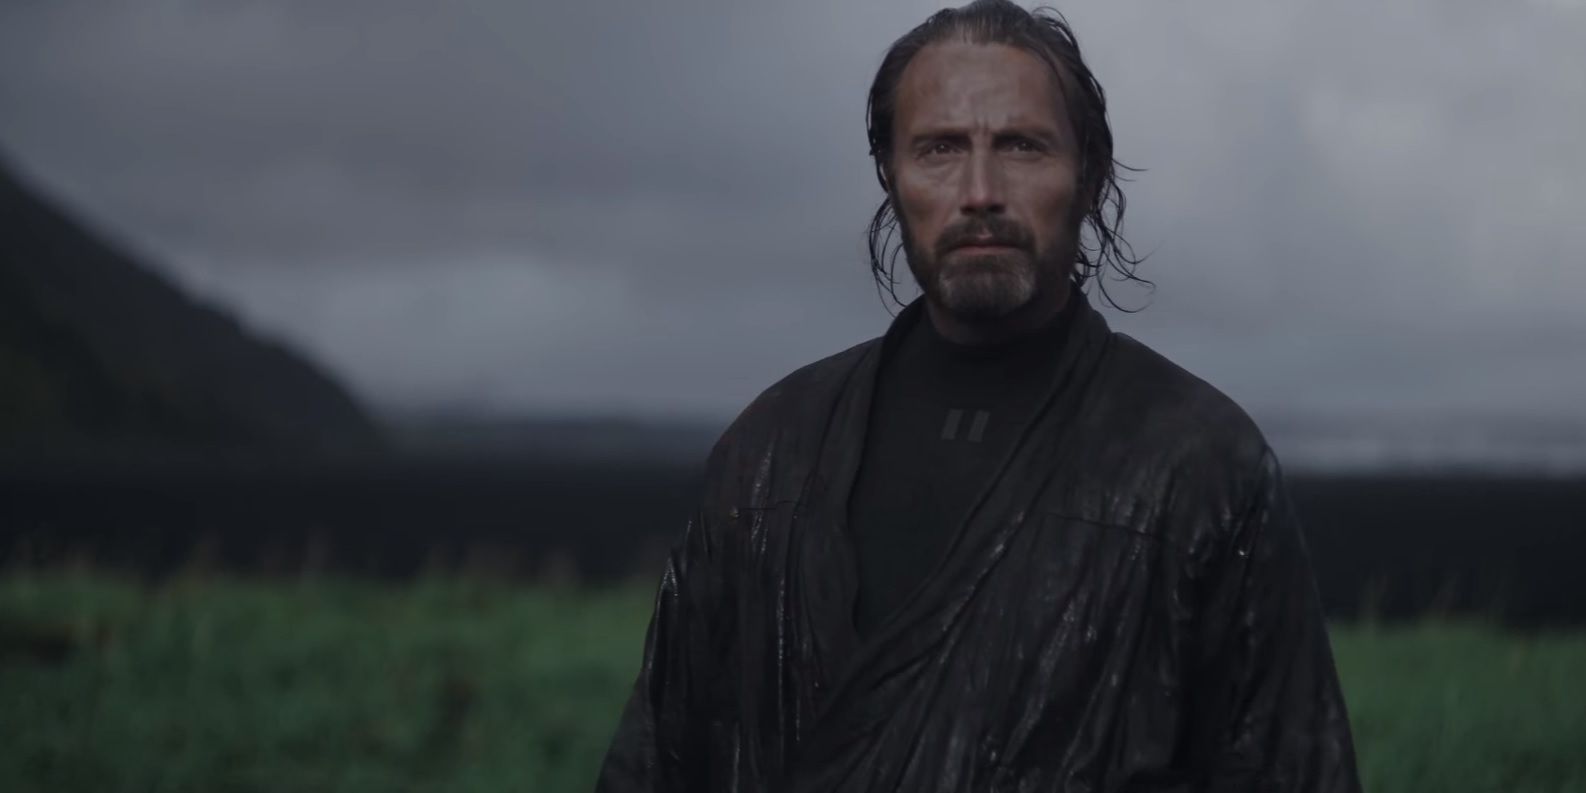 Mads Mikkelsens 5 Best Movies In English (& 5 Worst) According To Rotten Tomatoes